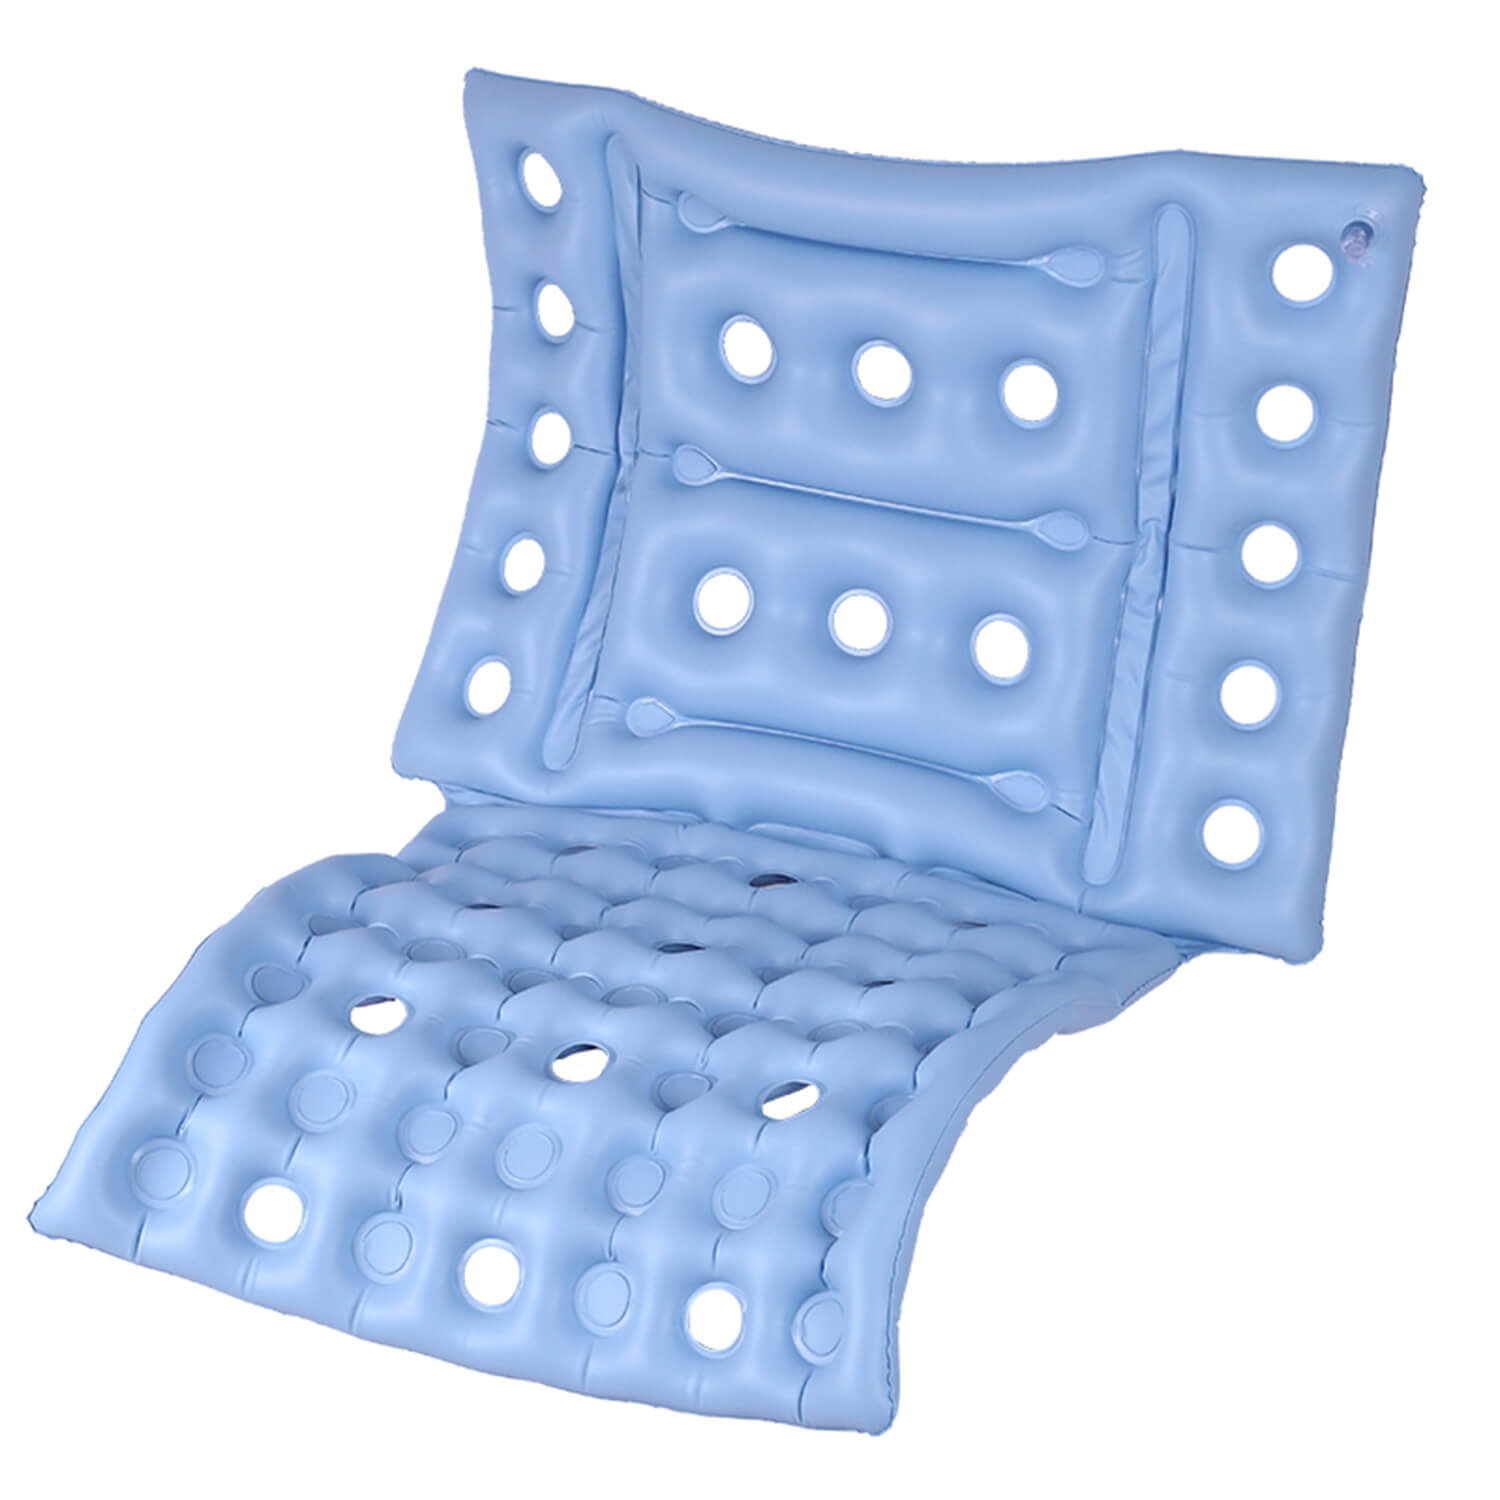 MIAOKE Medical Air Inflatable Seat Cushion for Wheelchair Office Home,  Ideal for Prolonged Sitting 17.7 X 17.7- Blue